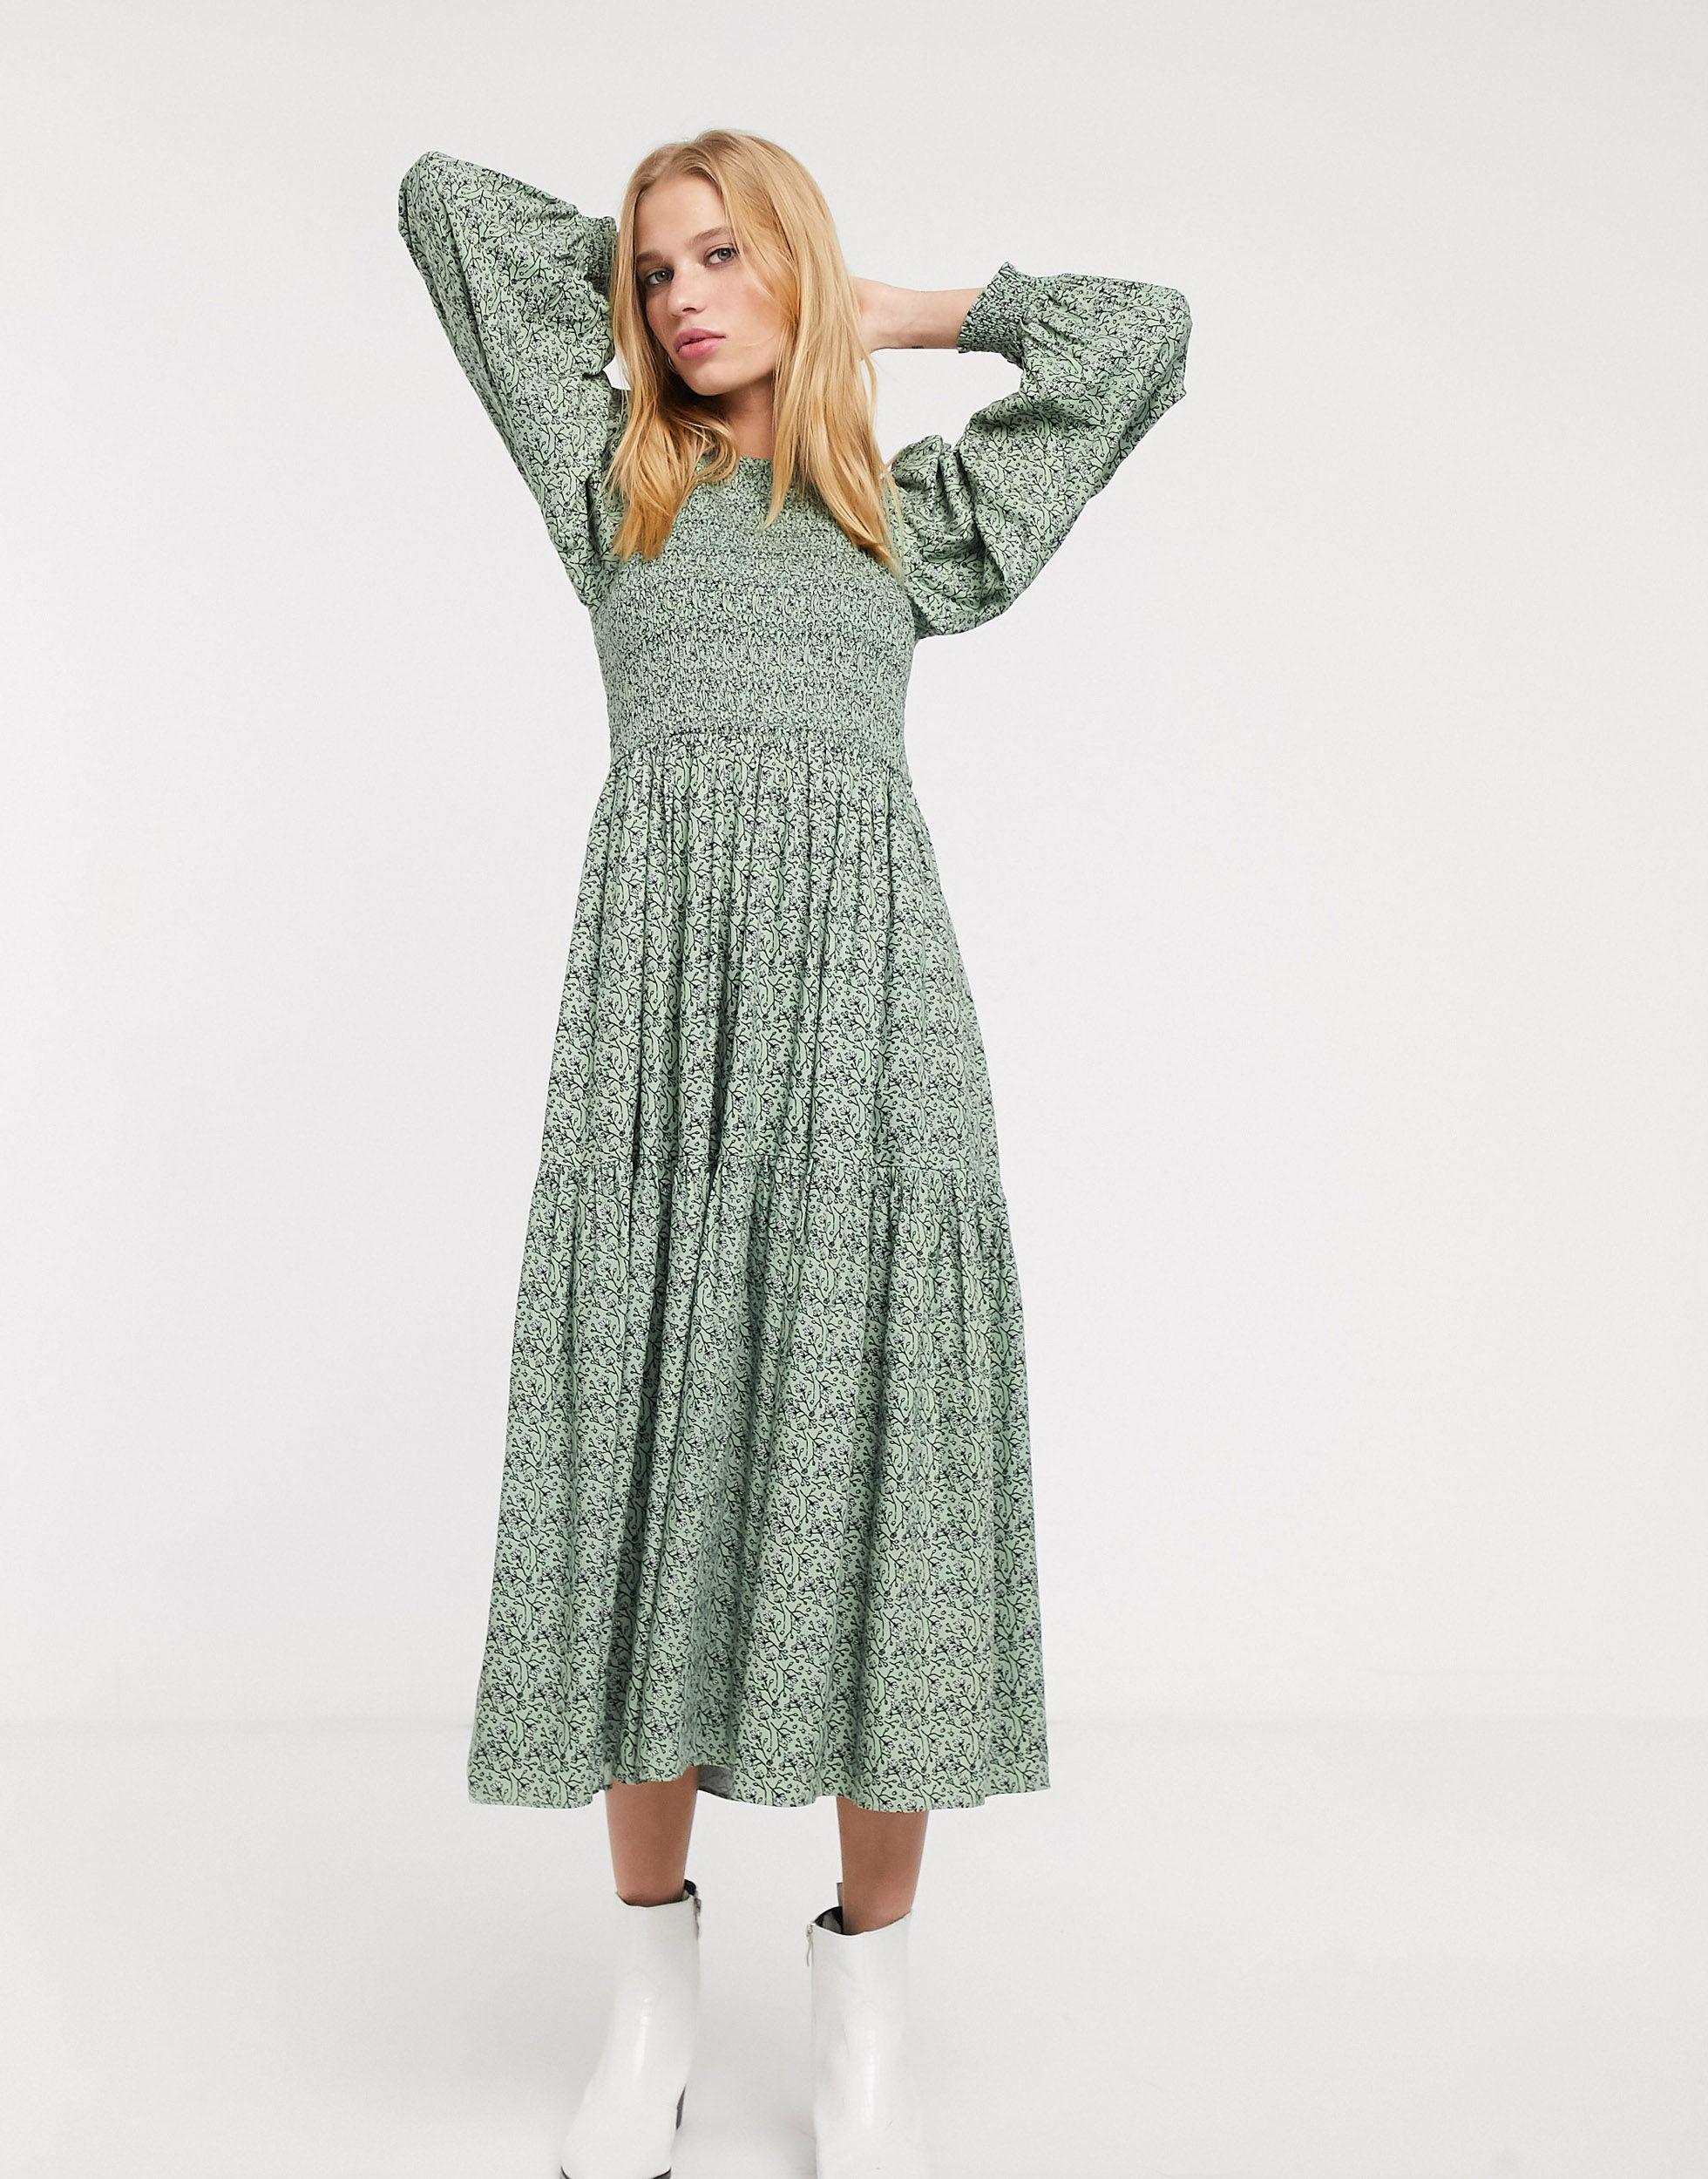 & Other Stories Synthetic Ditsy Floral Smocked Midi Prairie Dress in Green  - Lyst